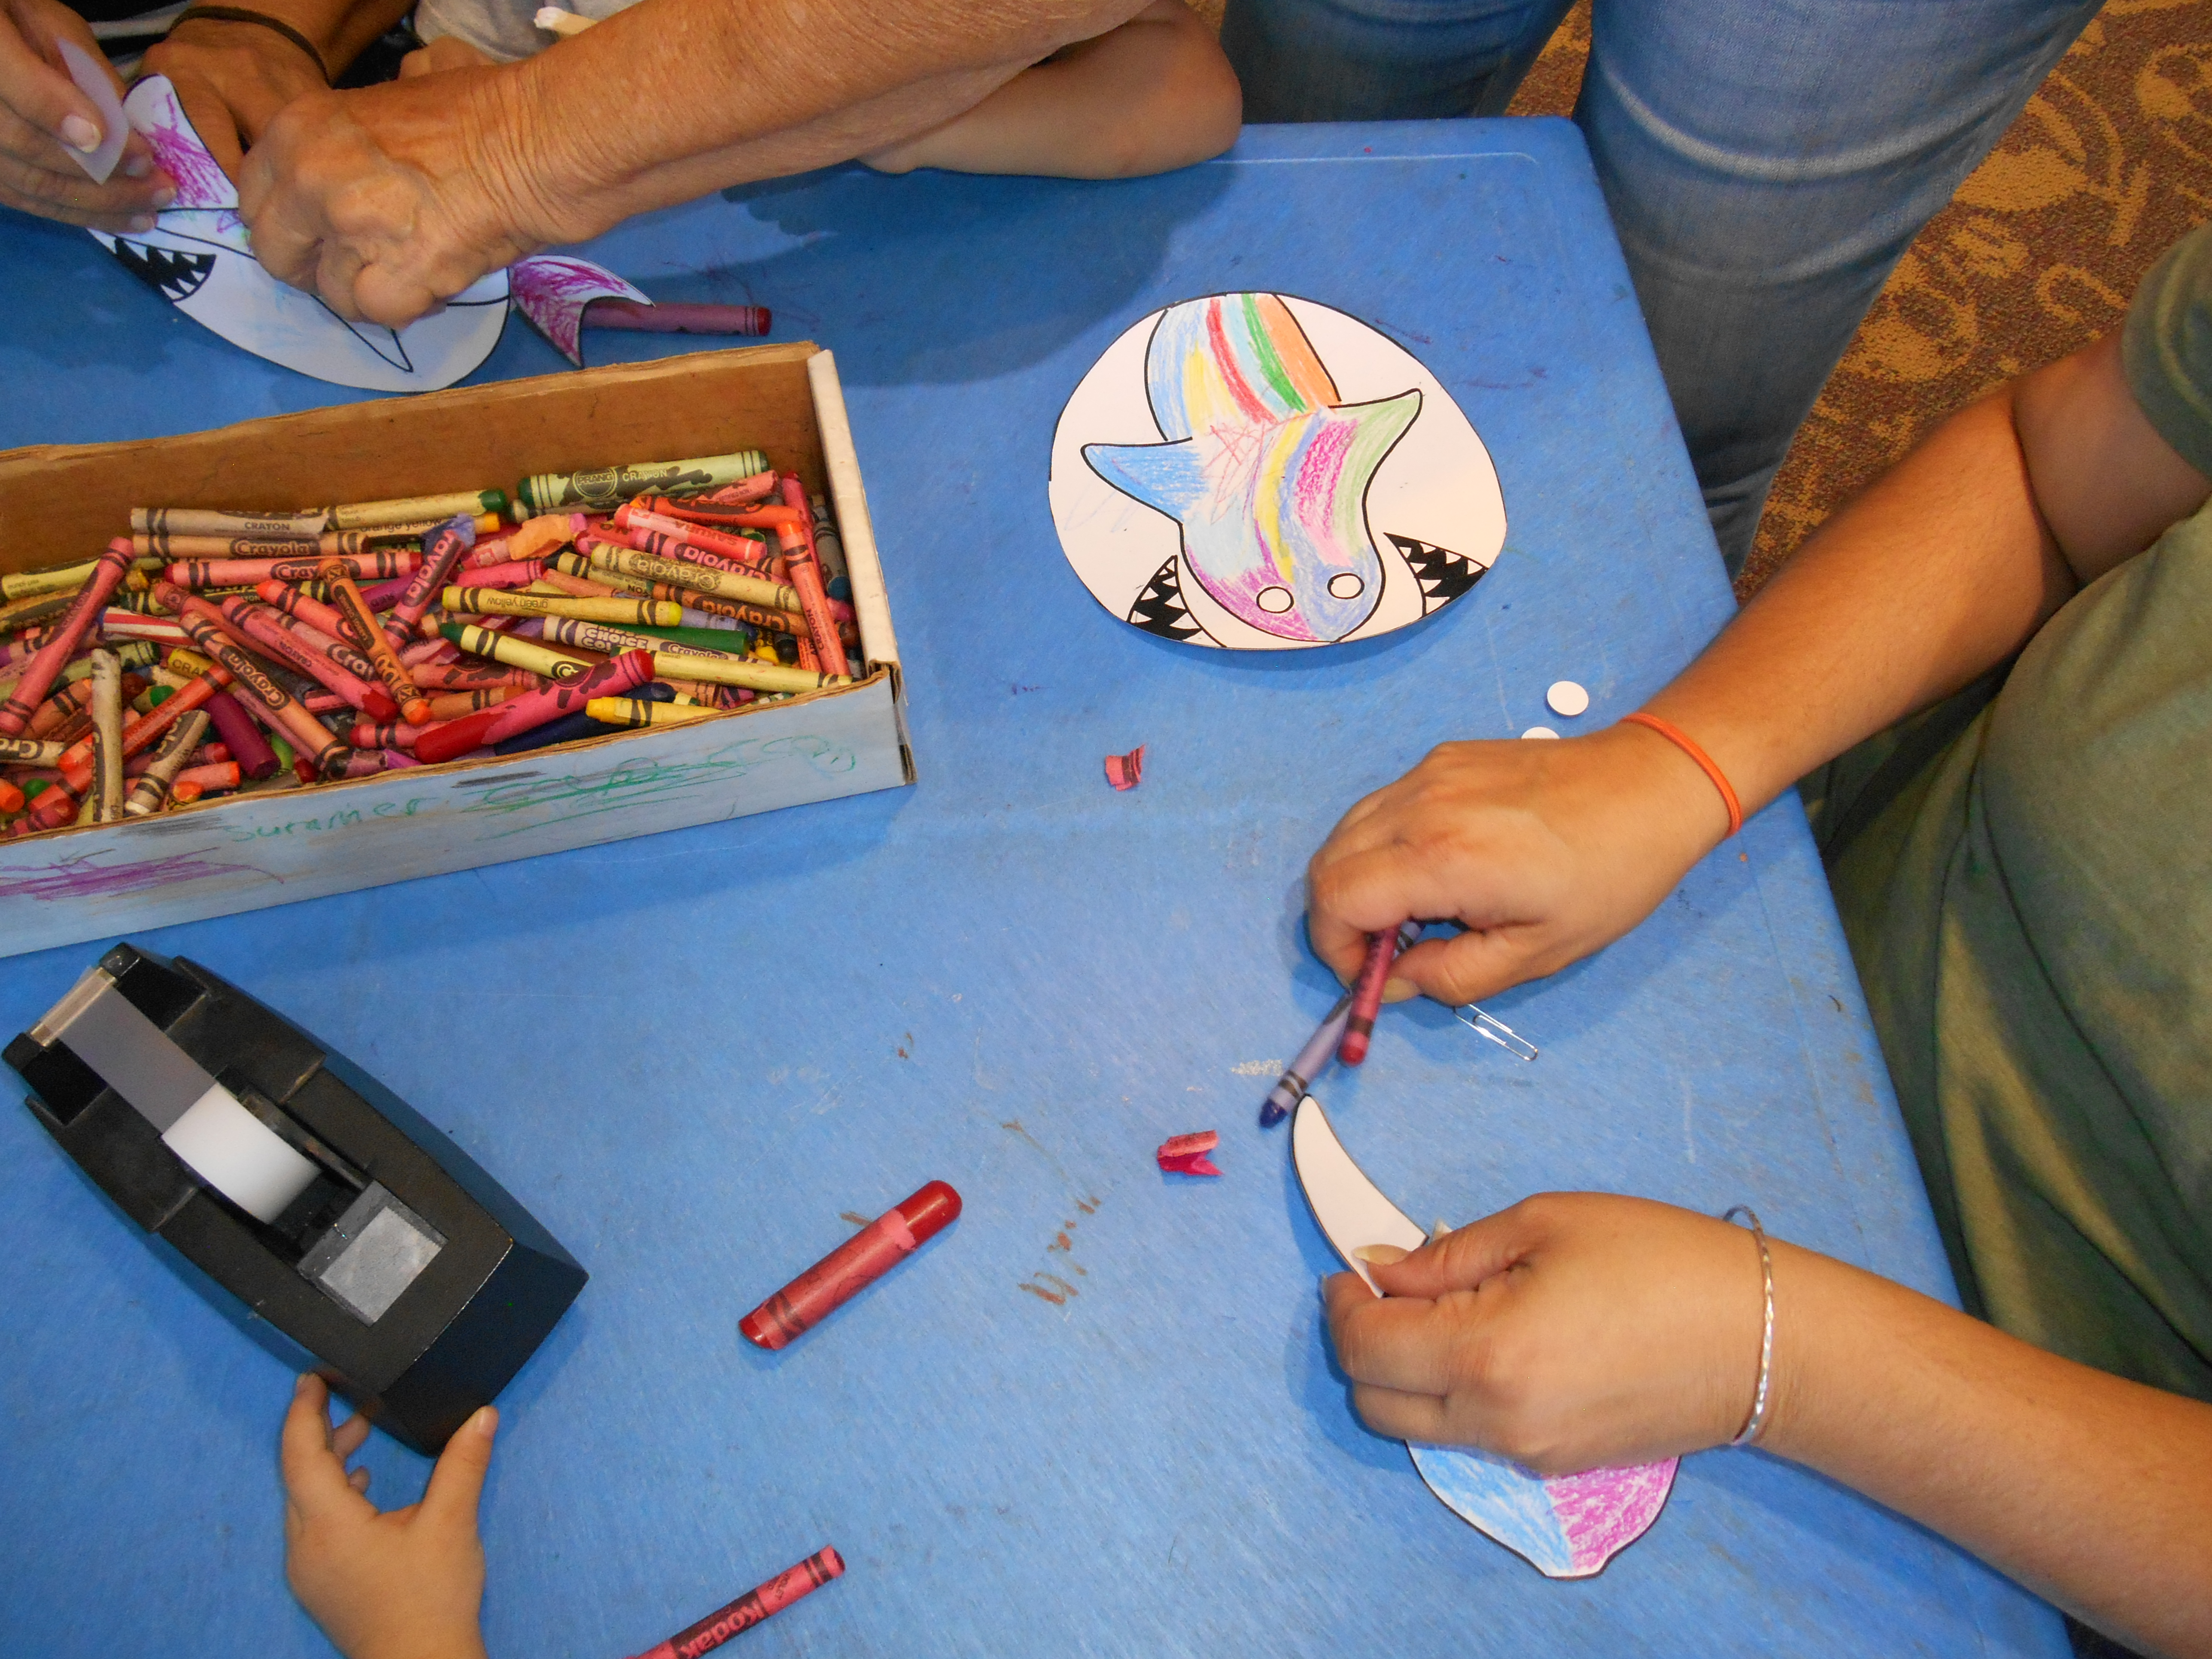 Children and Families doing crafts